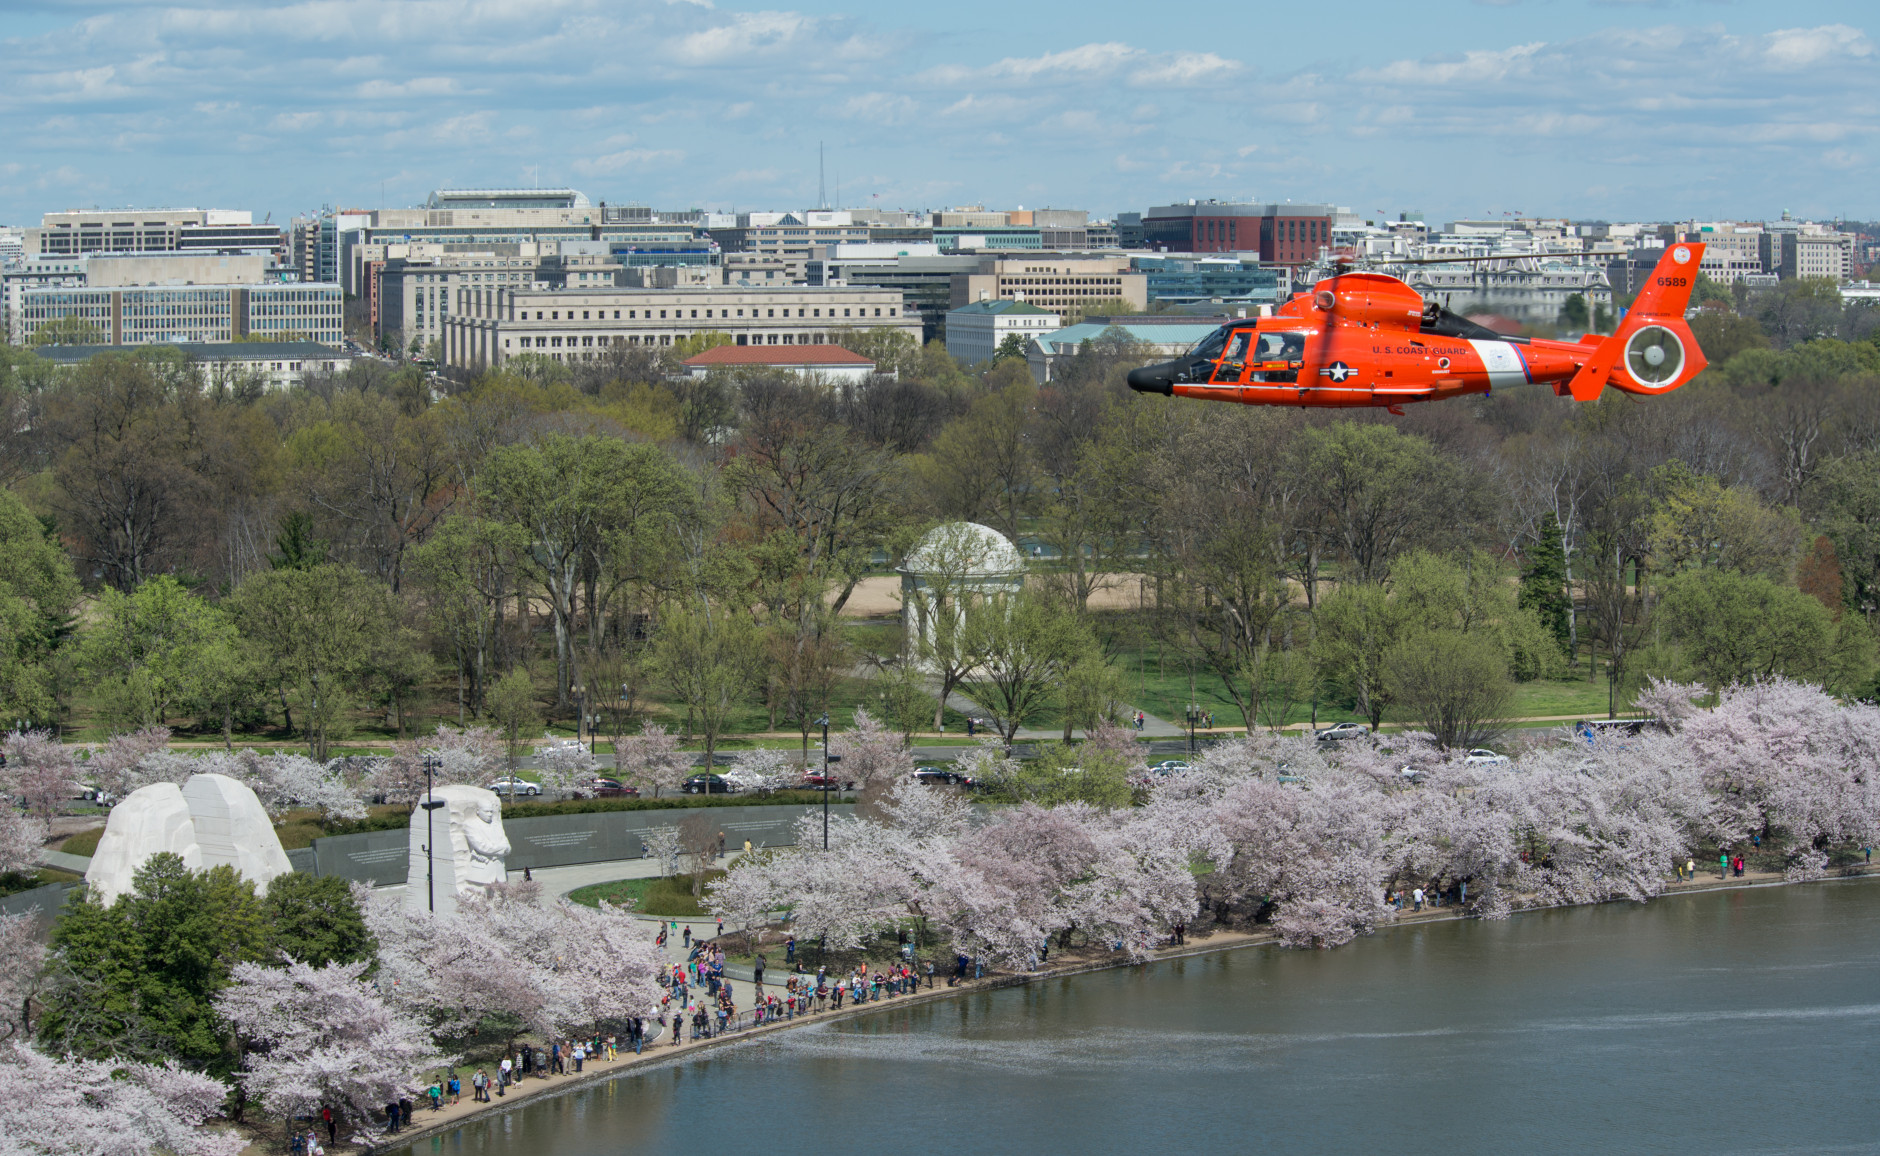 Helicopter crews from the Coast Guard’s National Capitol Region Air Defense Facility flew Monday, March 28, 2016. The crews fly around the capitol during trainings, familiarization flights, and responses. U.S. Coast Guard photo by Petty Officer 2nd Class David R. Marin